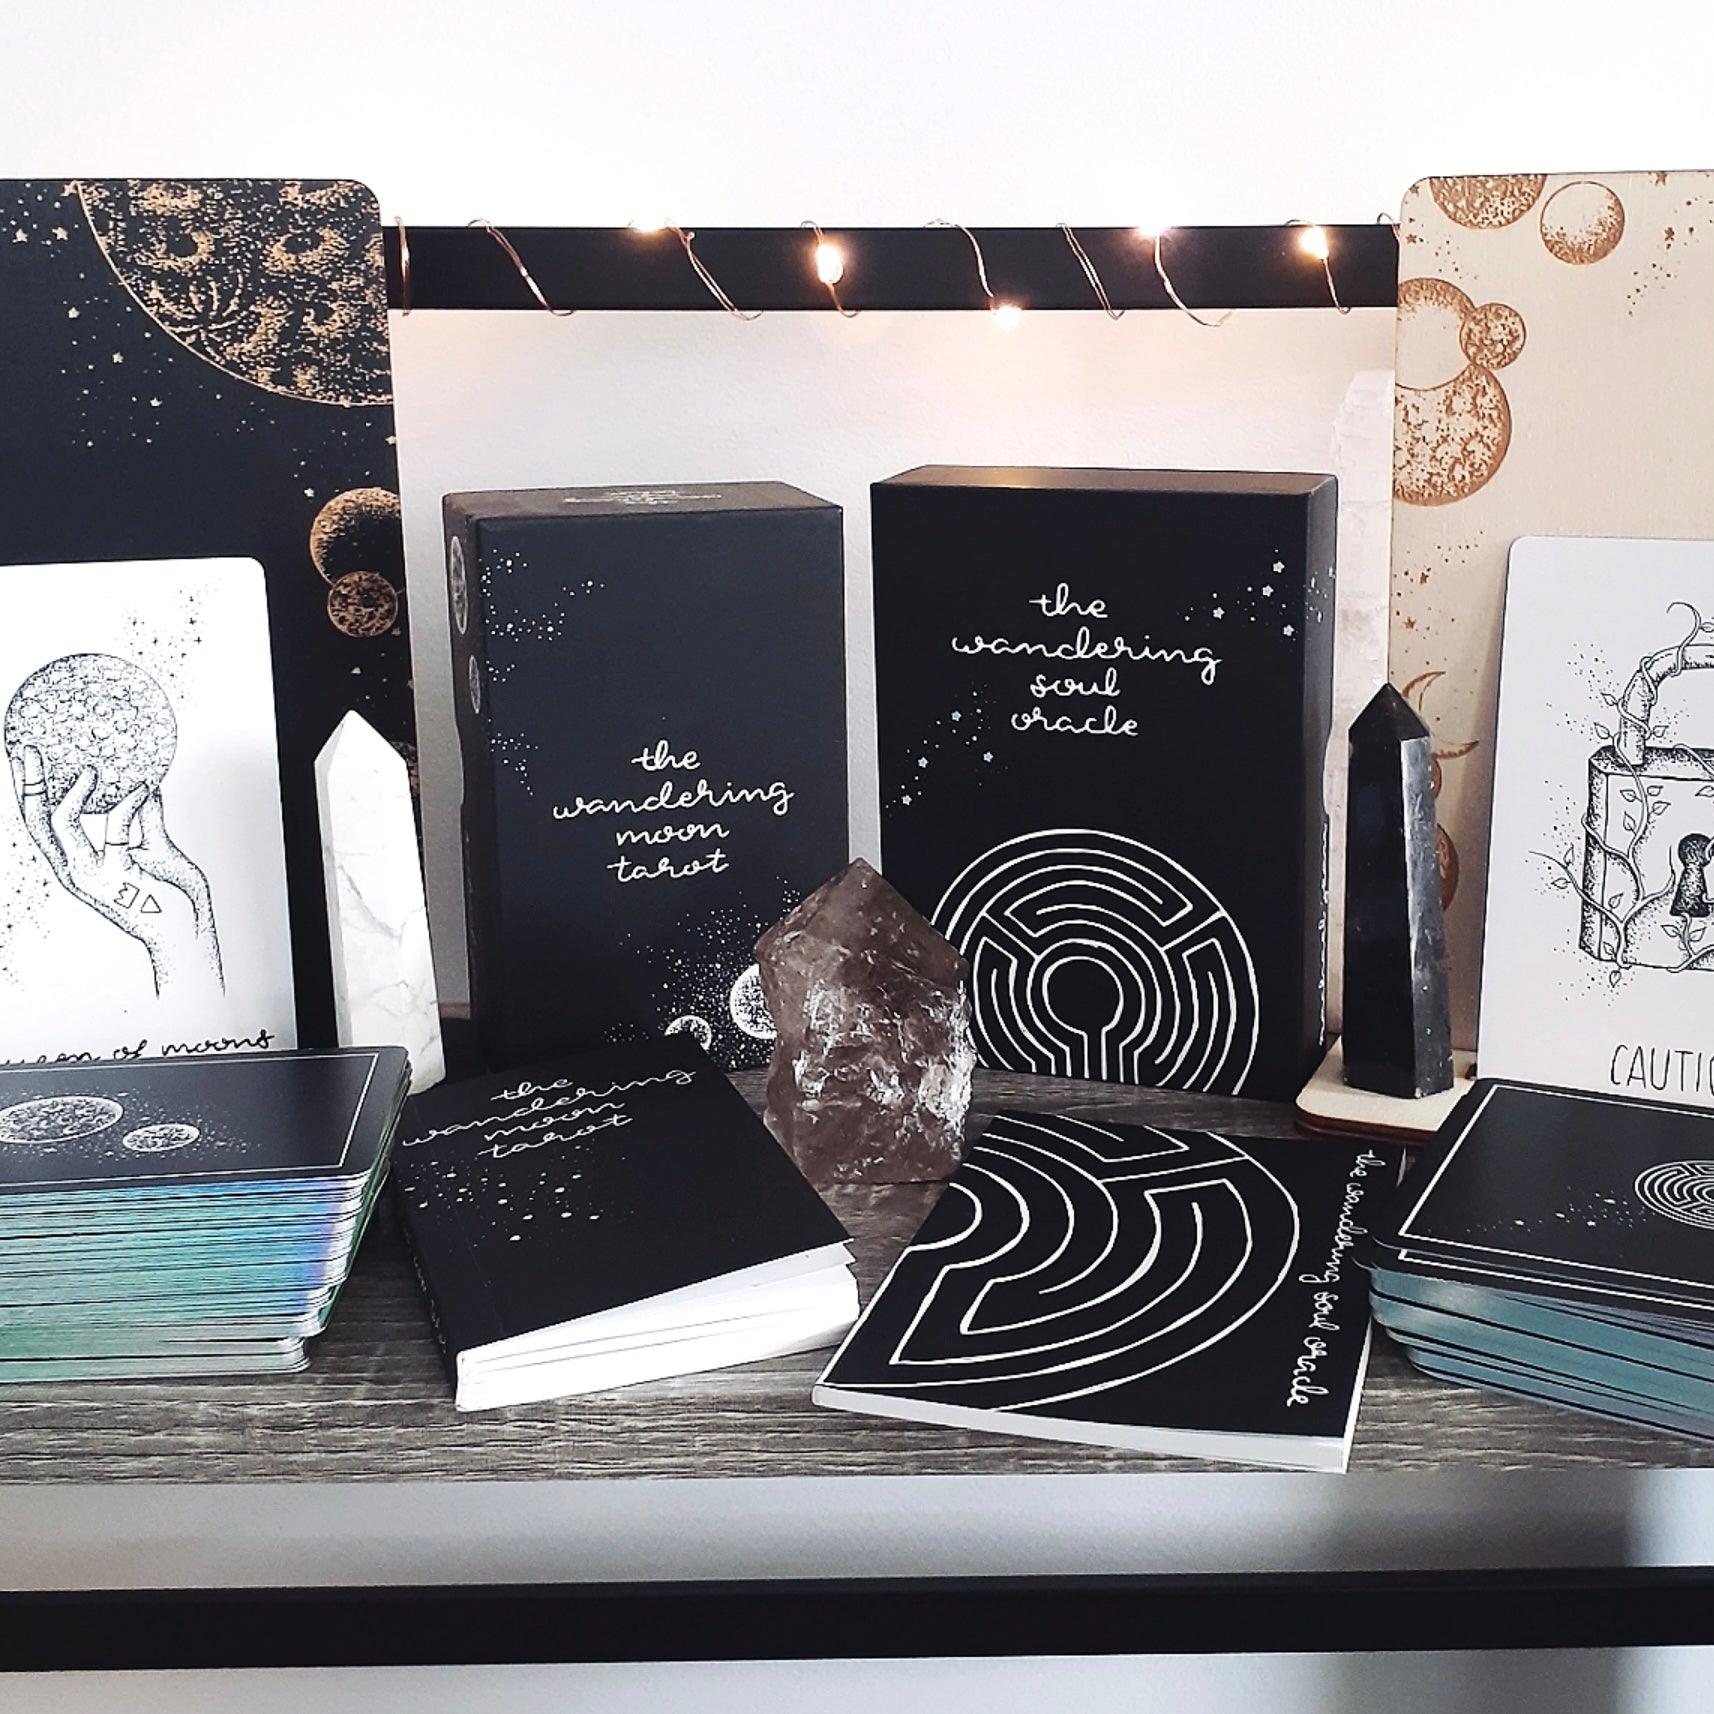 free tarot deck: wandering soul oracle, holographic illustrated aesthetic oracle cards - The Wandering Moon Co.